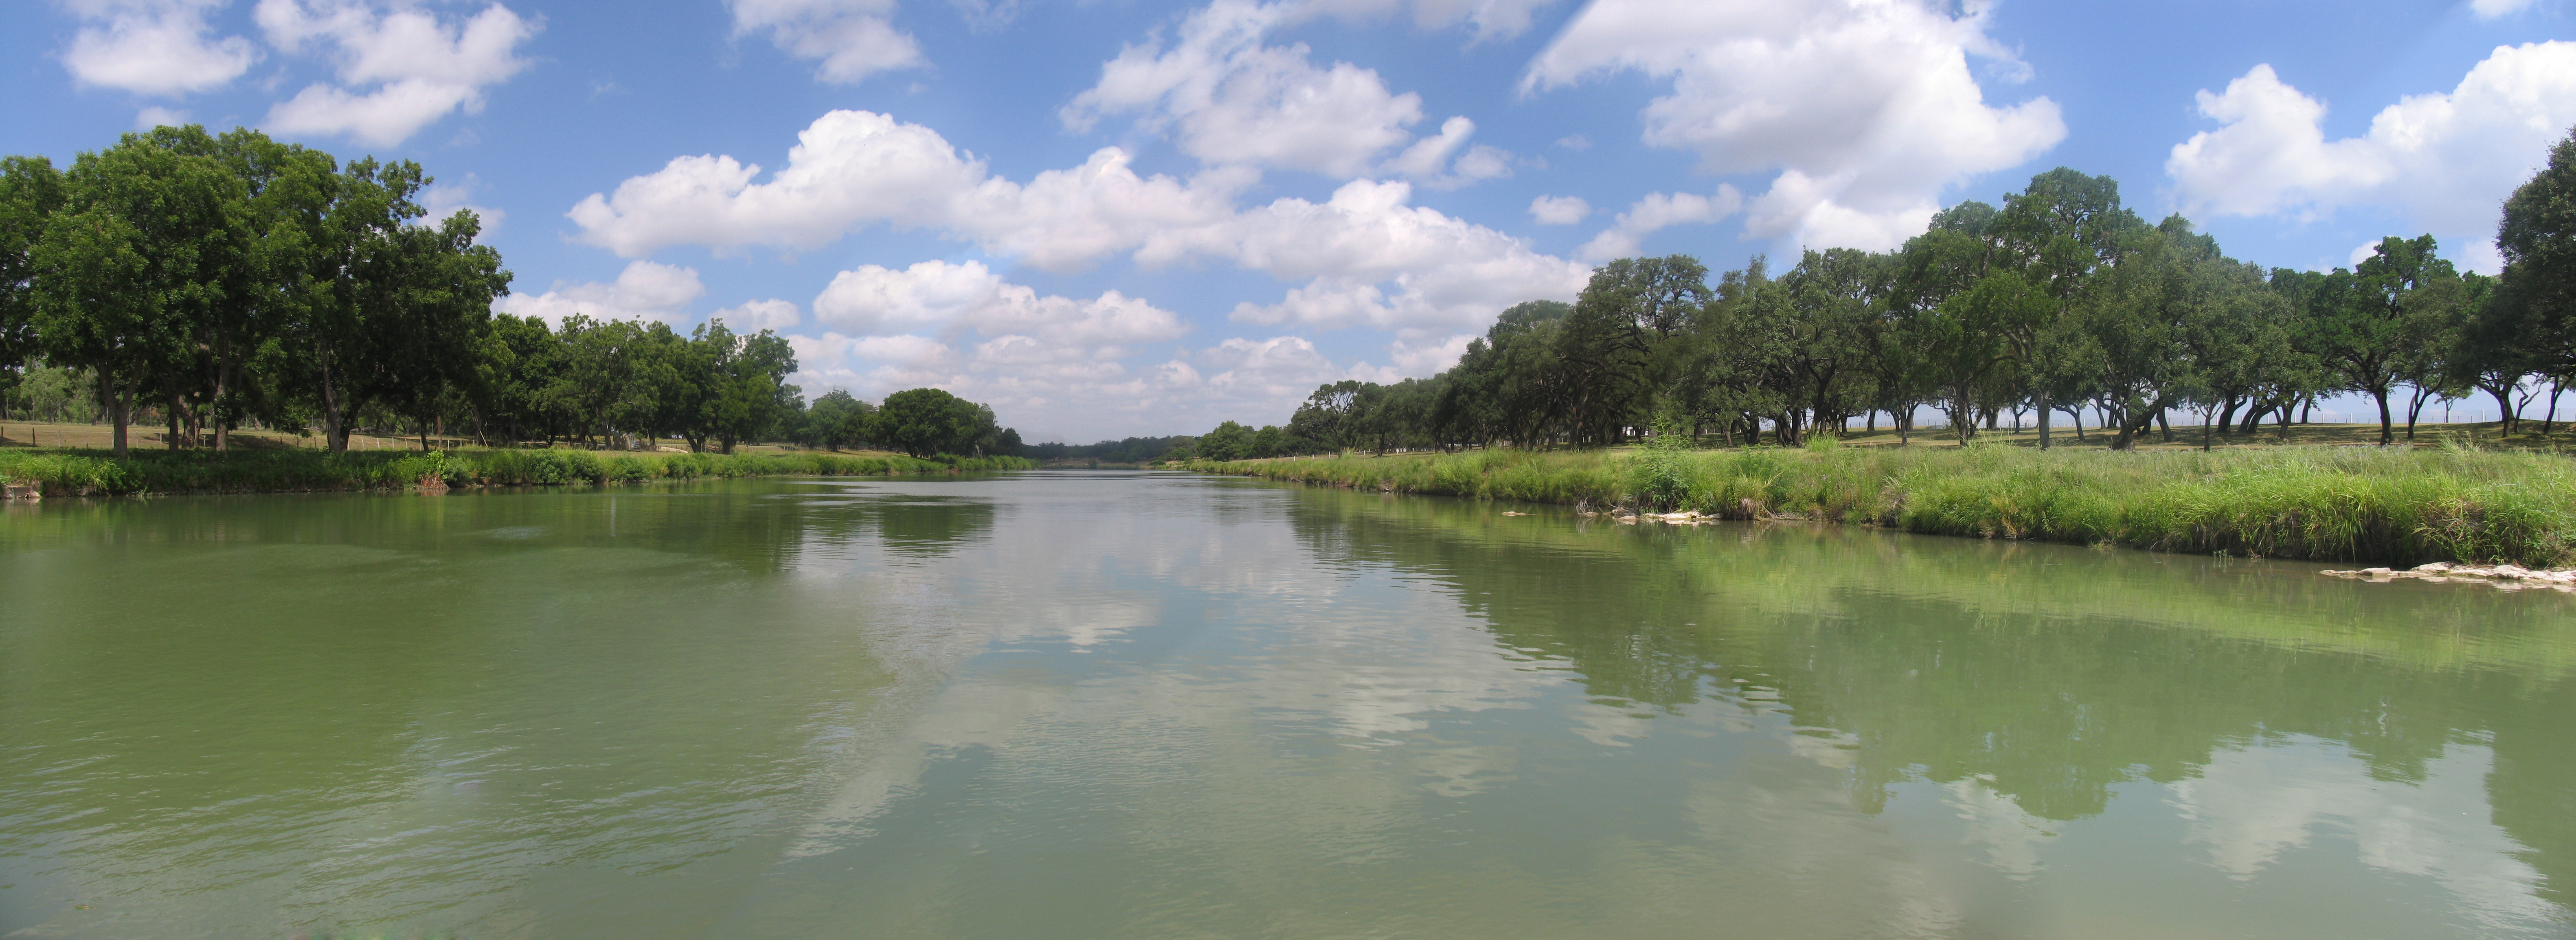 The Pedernales River with tree-lined banks under a blue sky dotted with clouds.